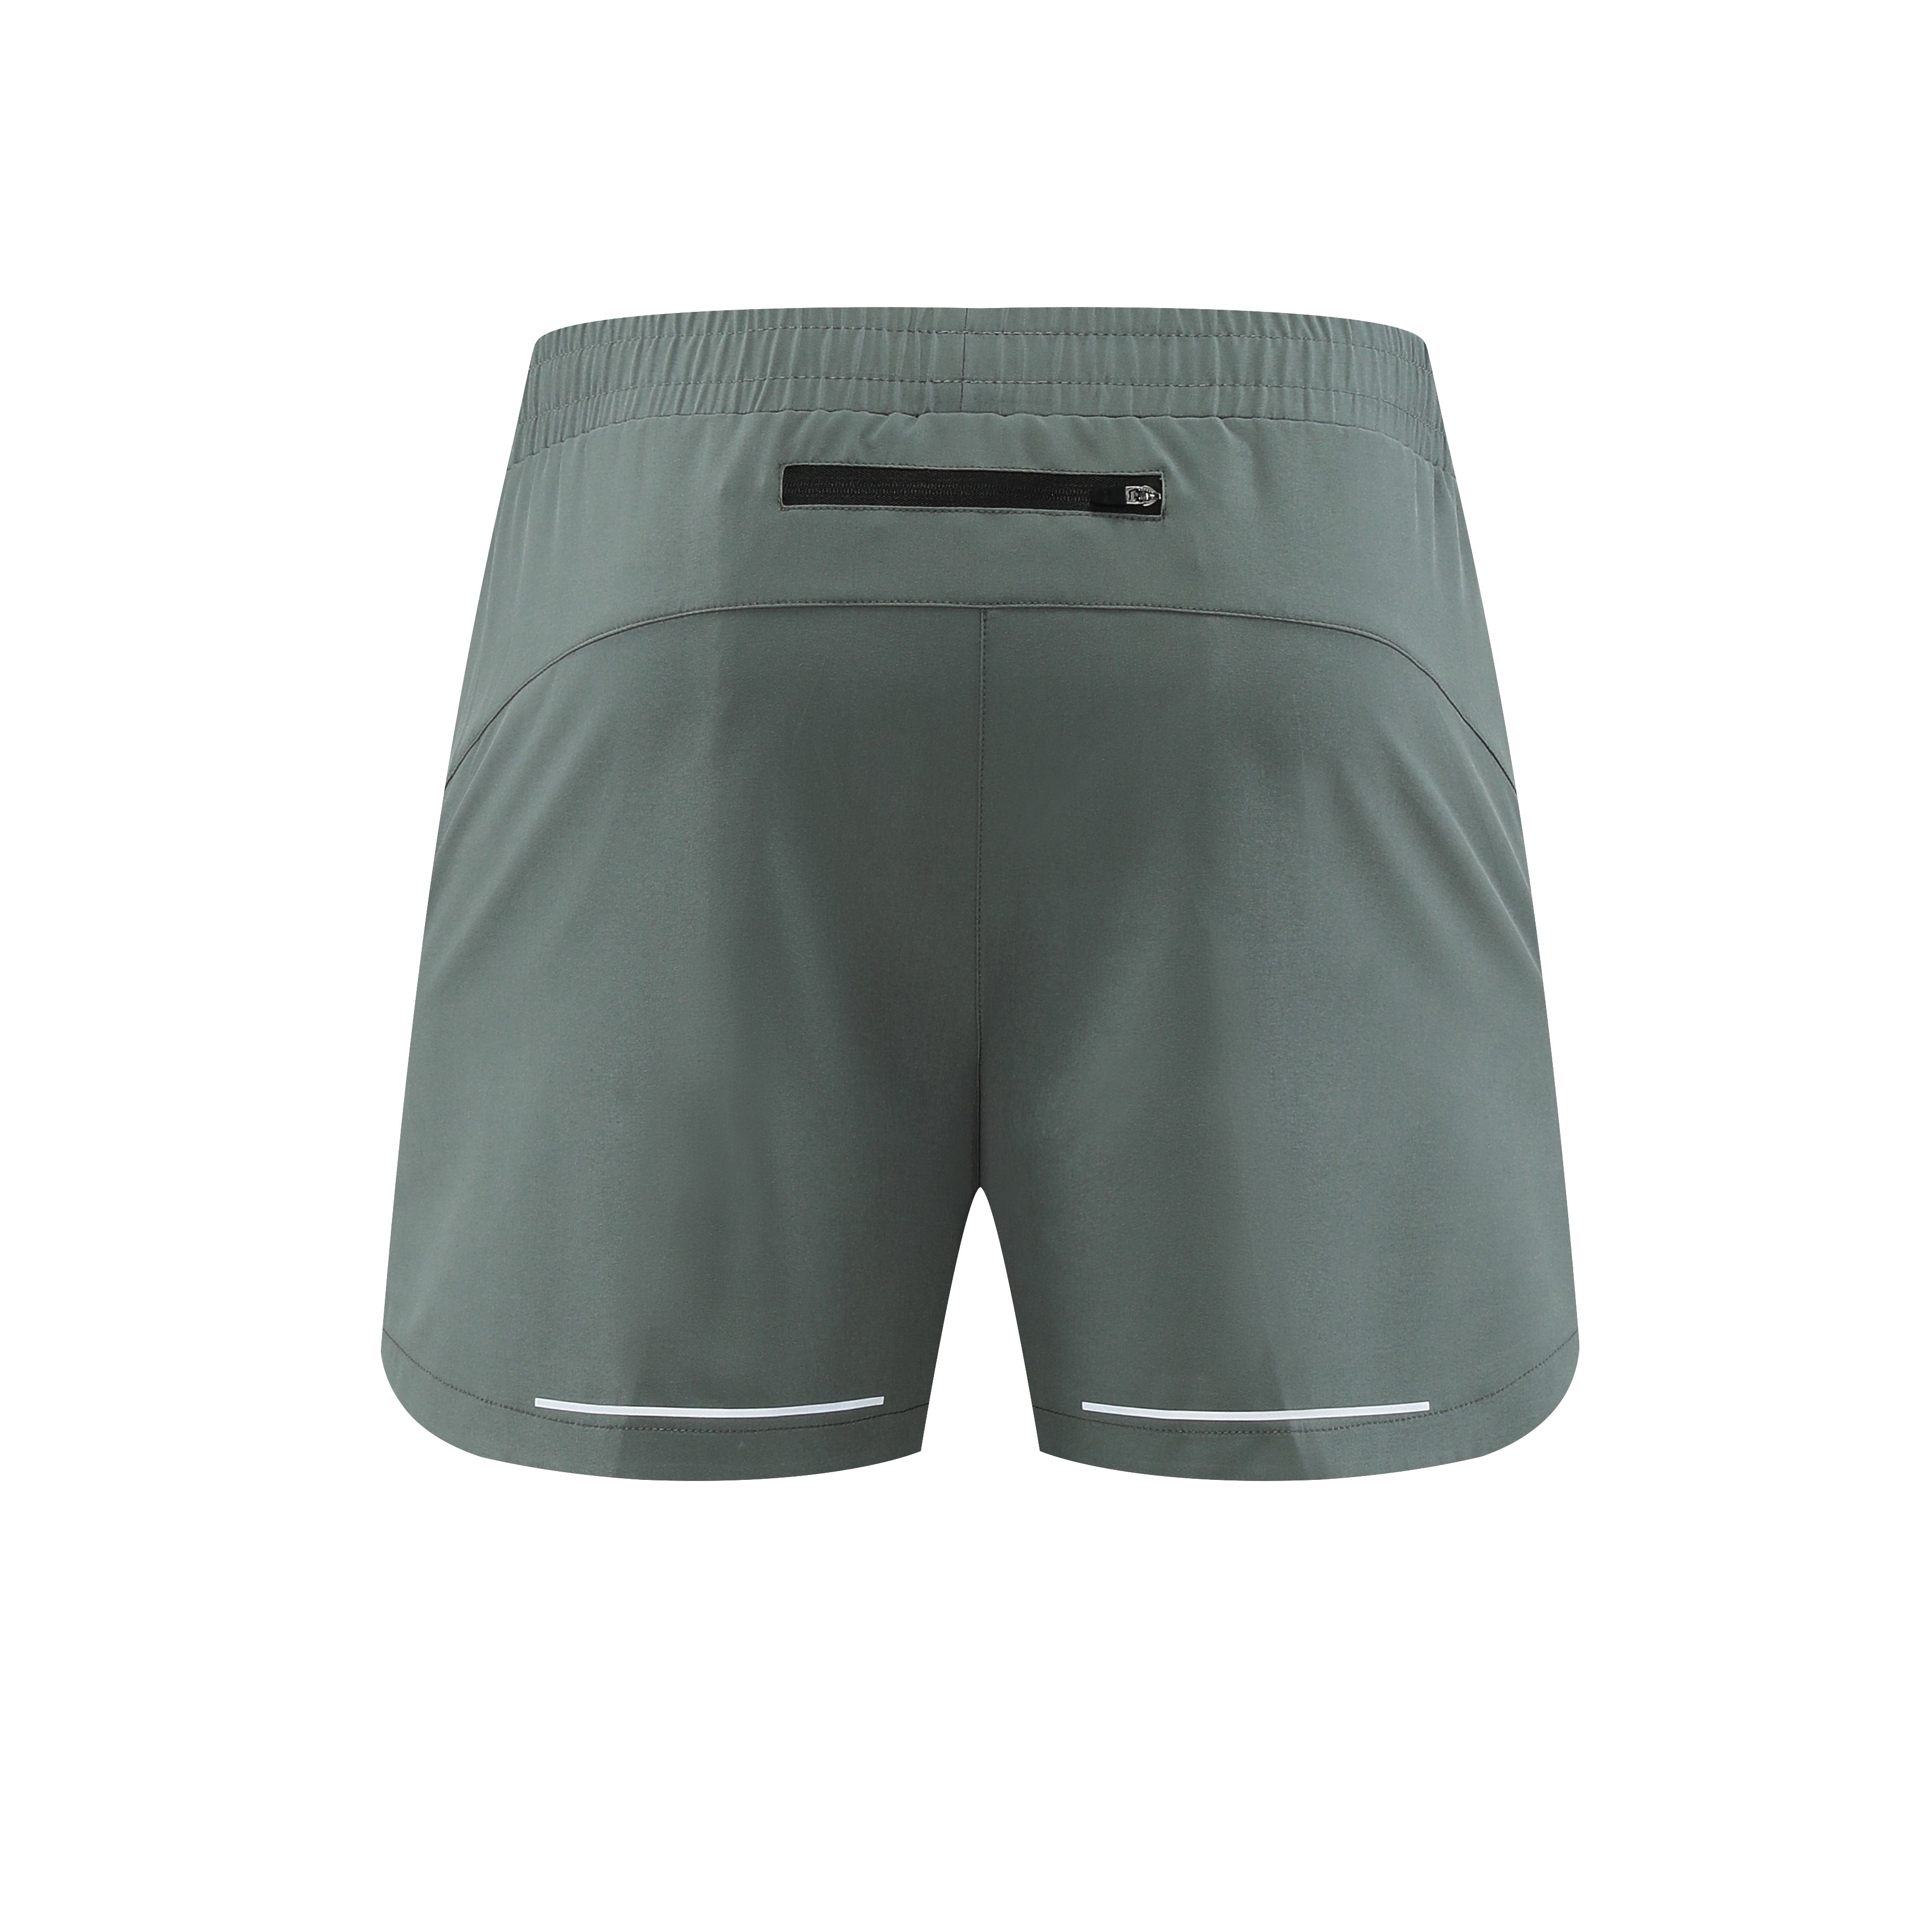 Electronic Spartan A Graphic Shorts